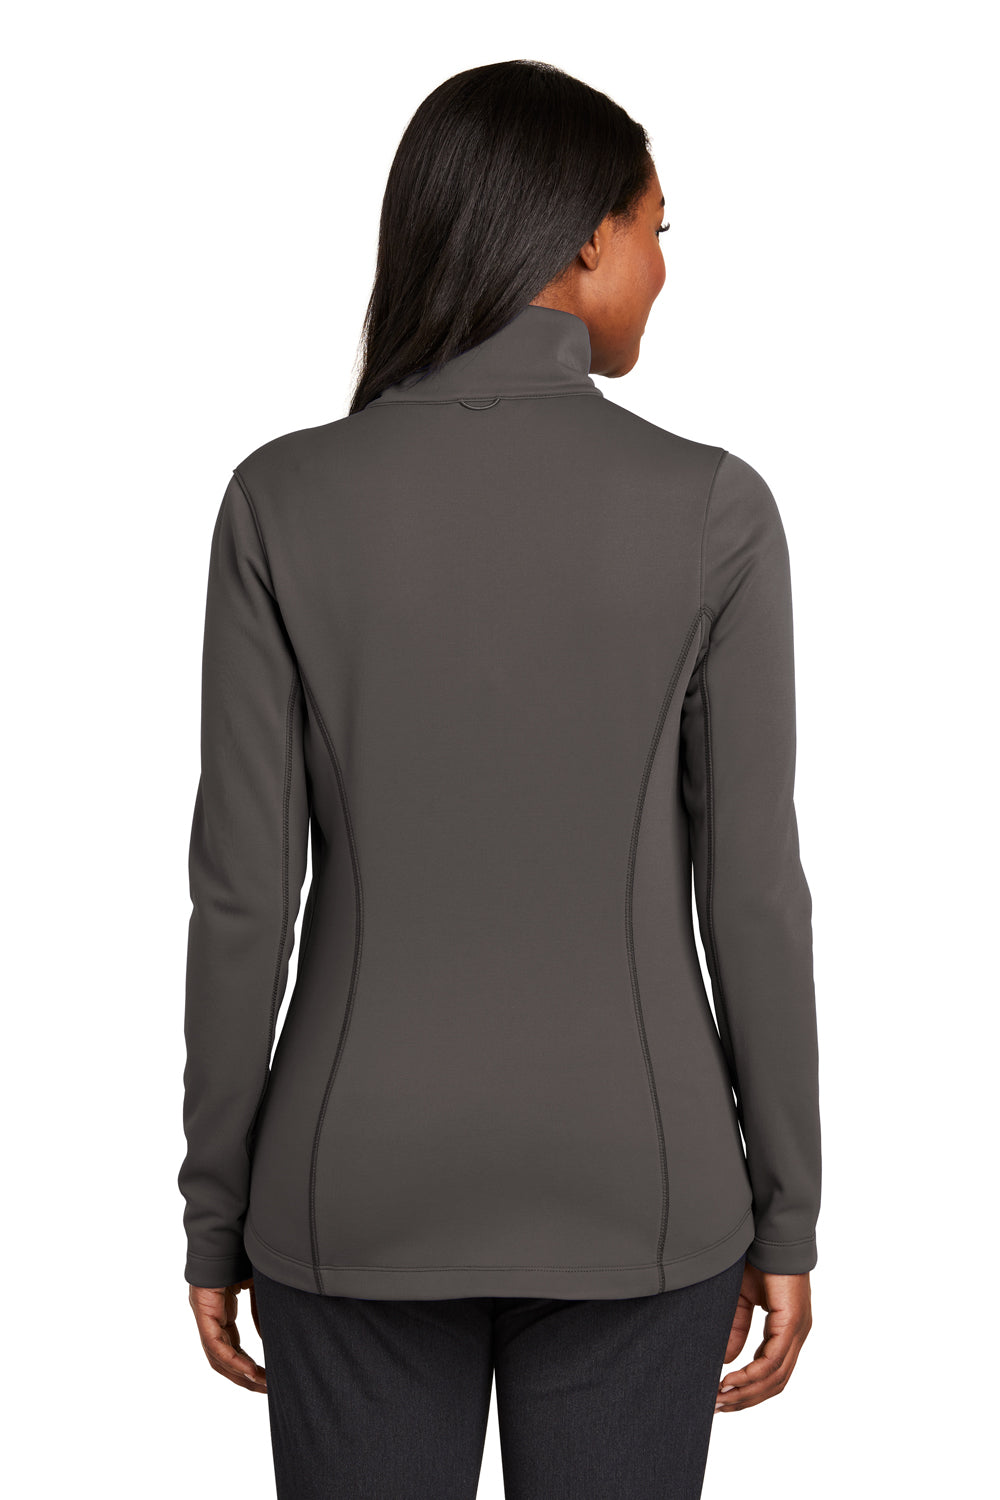 Port Authority L904 Womens Collective Full Zip Smooth Fleece Jacket Graphite Grey Back